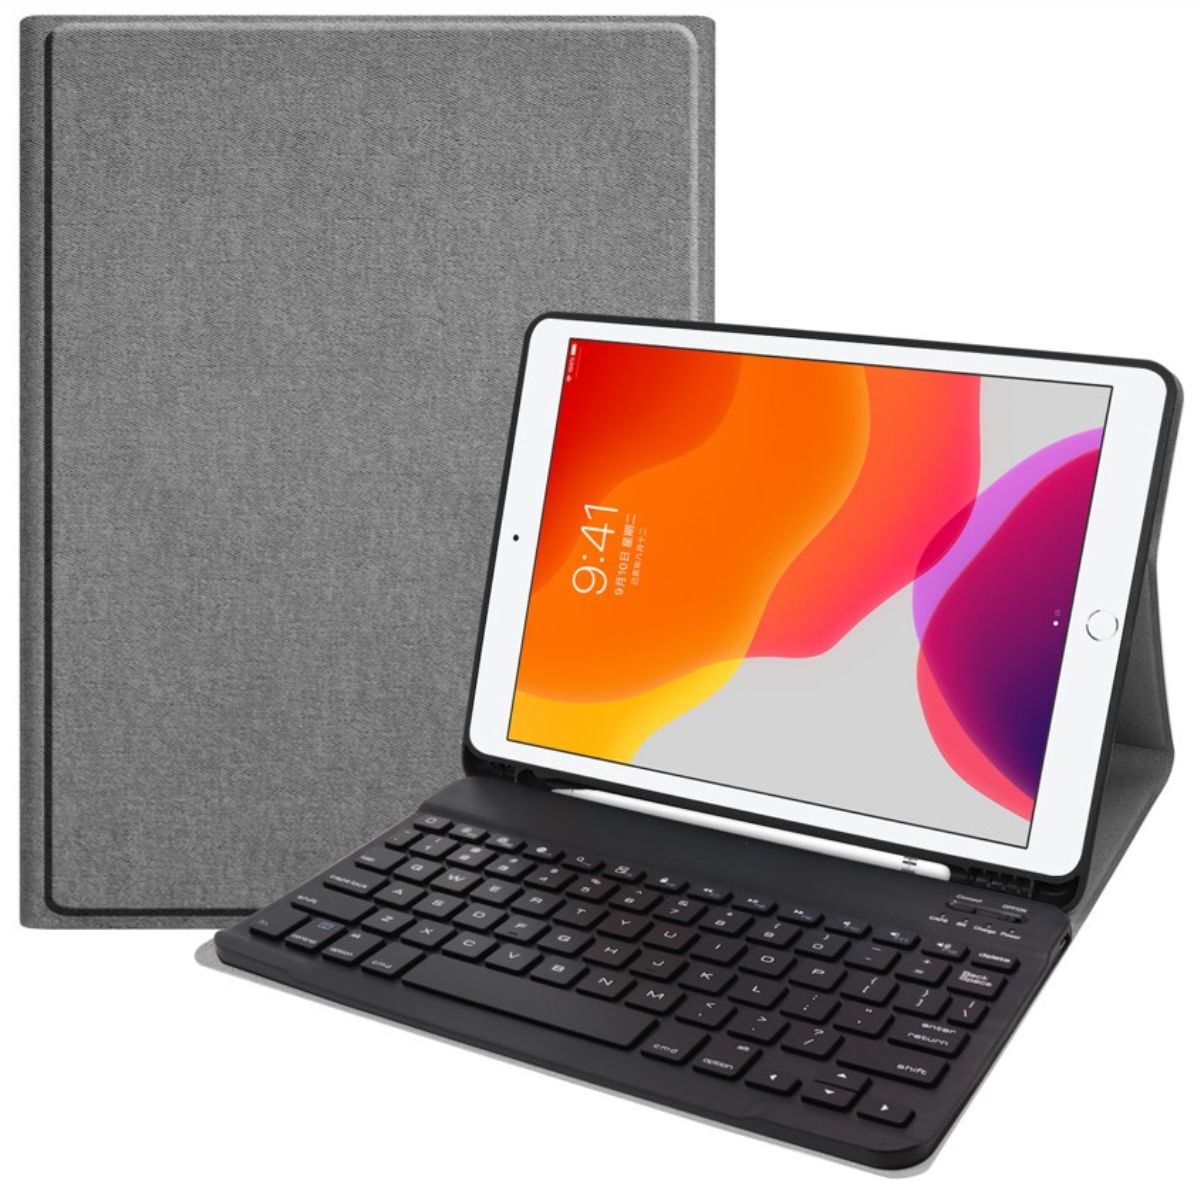 SK-09 Gray Case Ipad 7 2019 Ipad 8 th 9 th 2021 2020 10.2 Inch Air 3 10.5 Inch Leather Case Wireless Bluetooth FLIP COVER Sarung Keyboard Pen Slot